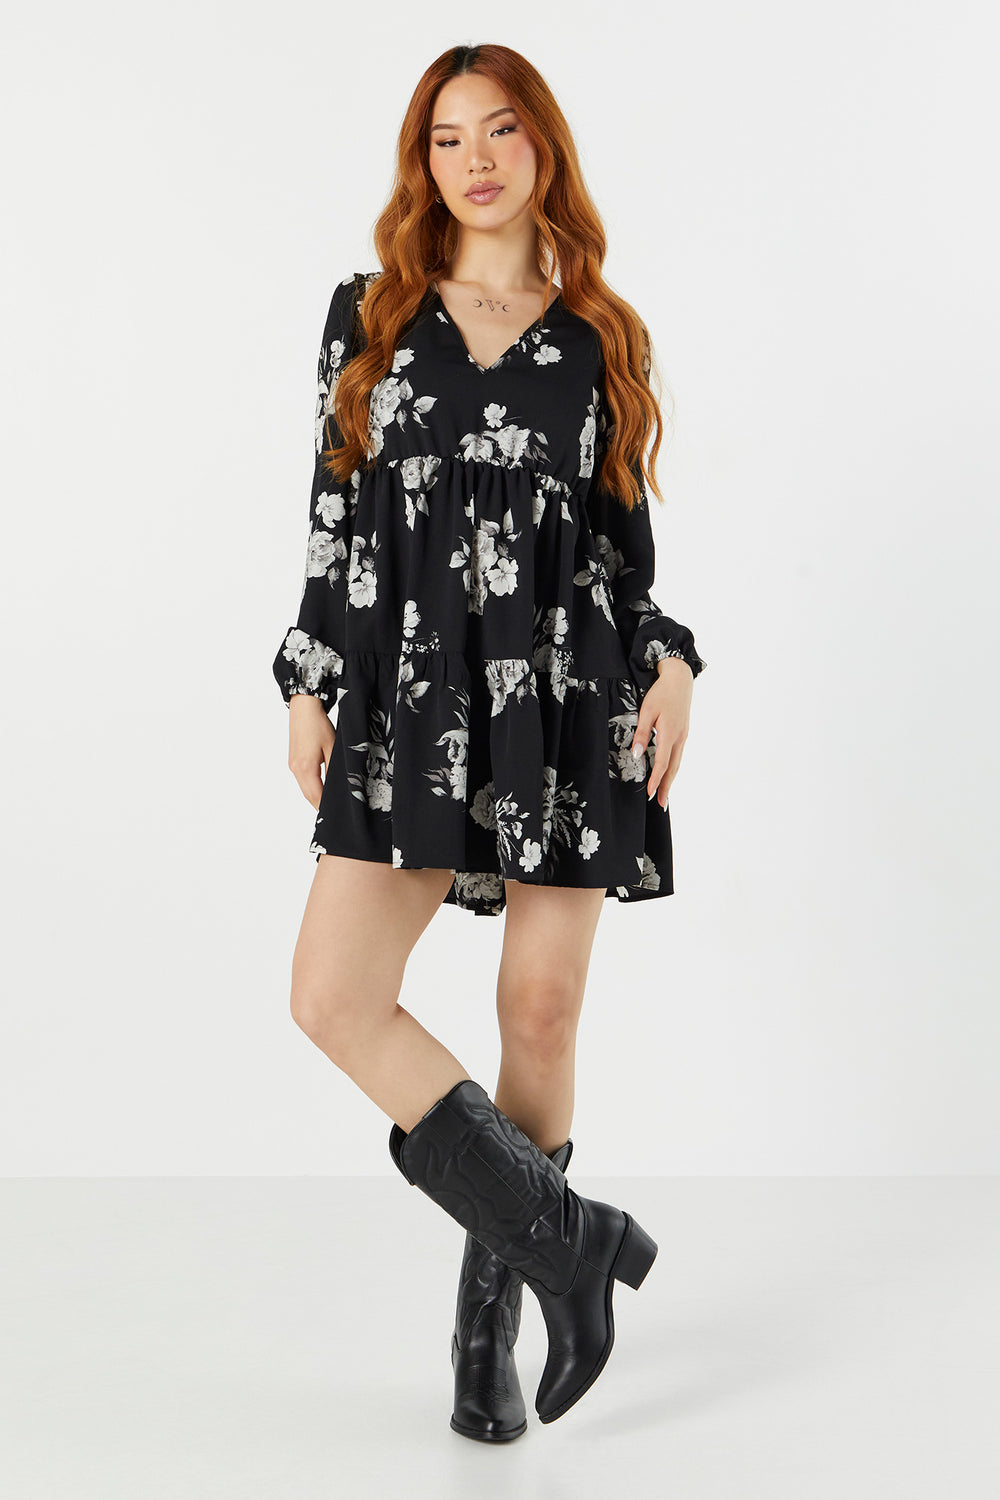 Black Floral Long Sleeve Tiered Babydoll Dress Black Floral Long Sleeve Tiered Babydoll Dress 3